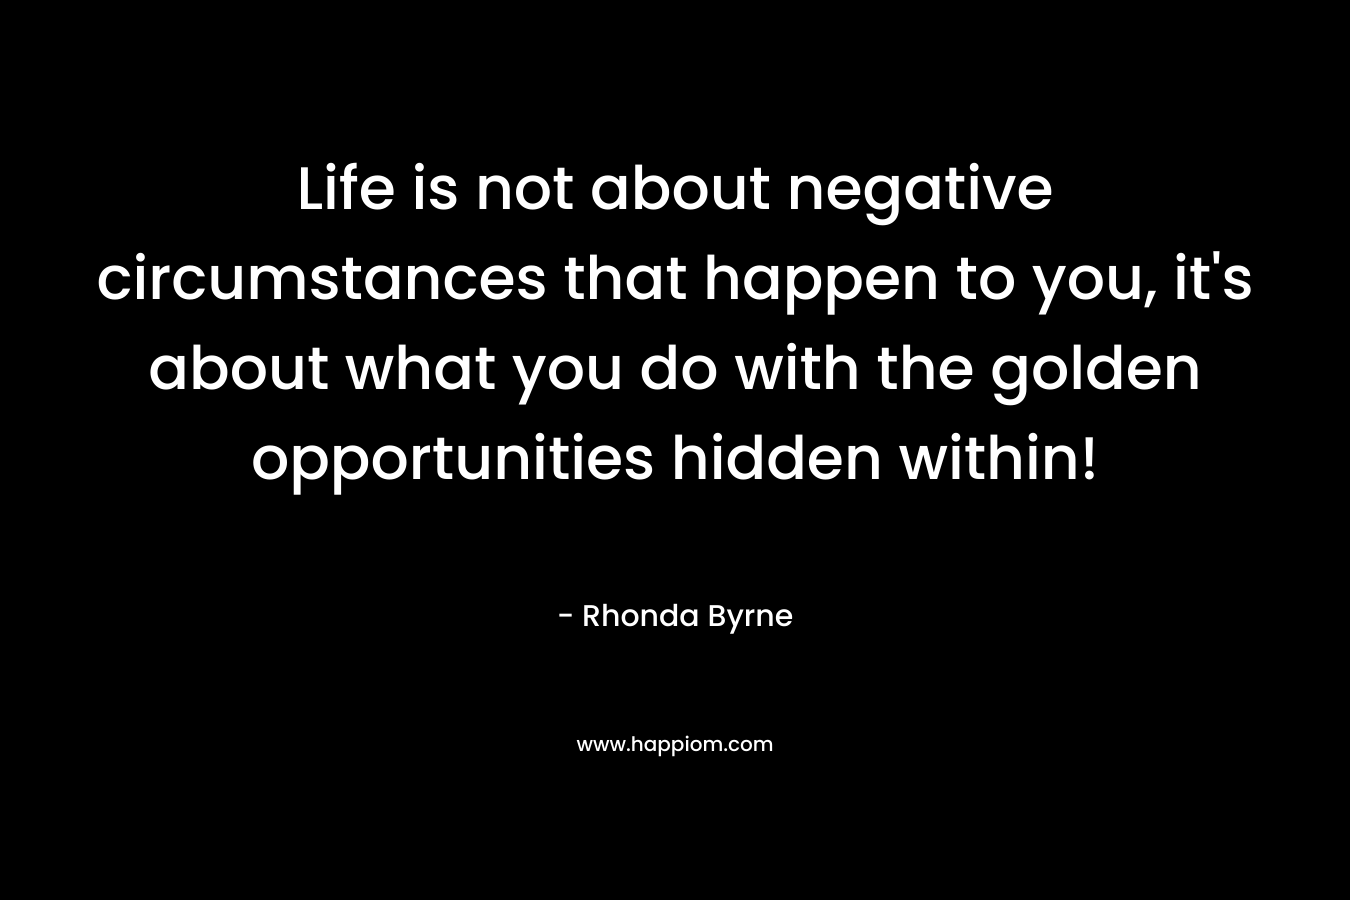 Life is not about negative circumstances that happen to you, it's about what you do with the golden opportunities hidden within!